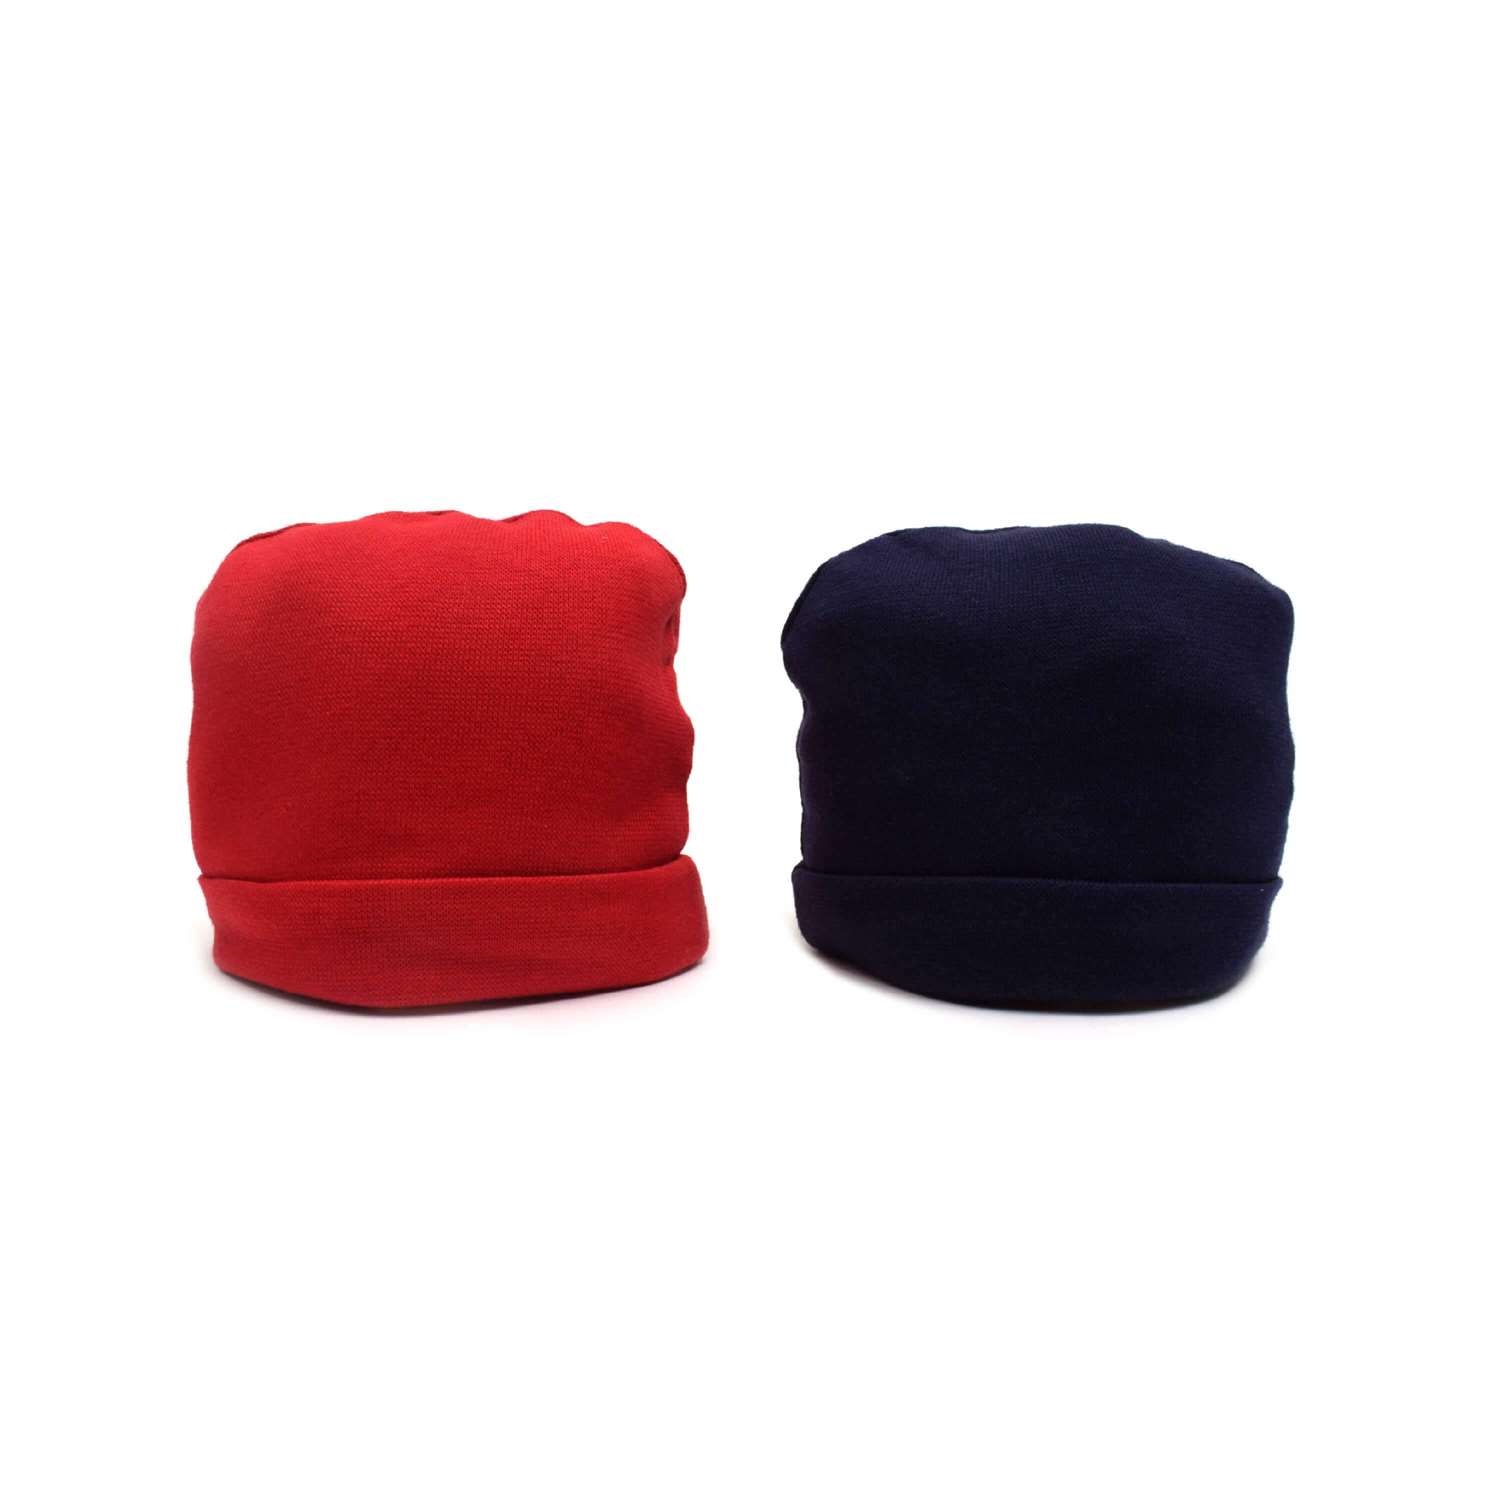 Round Soft Hosiery Cotton Caps for Babies Pack of 2, 0-3m Age - Red & Navy Blue